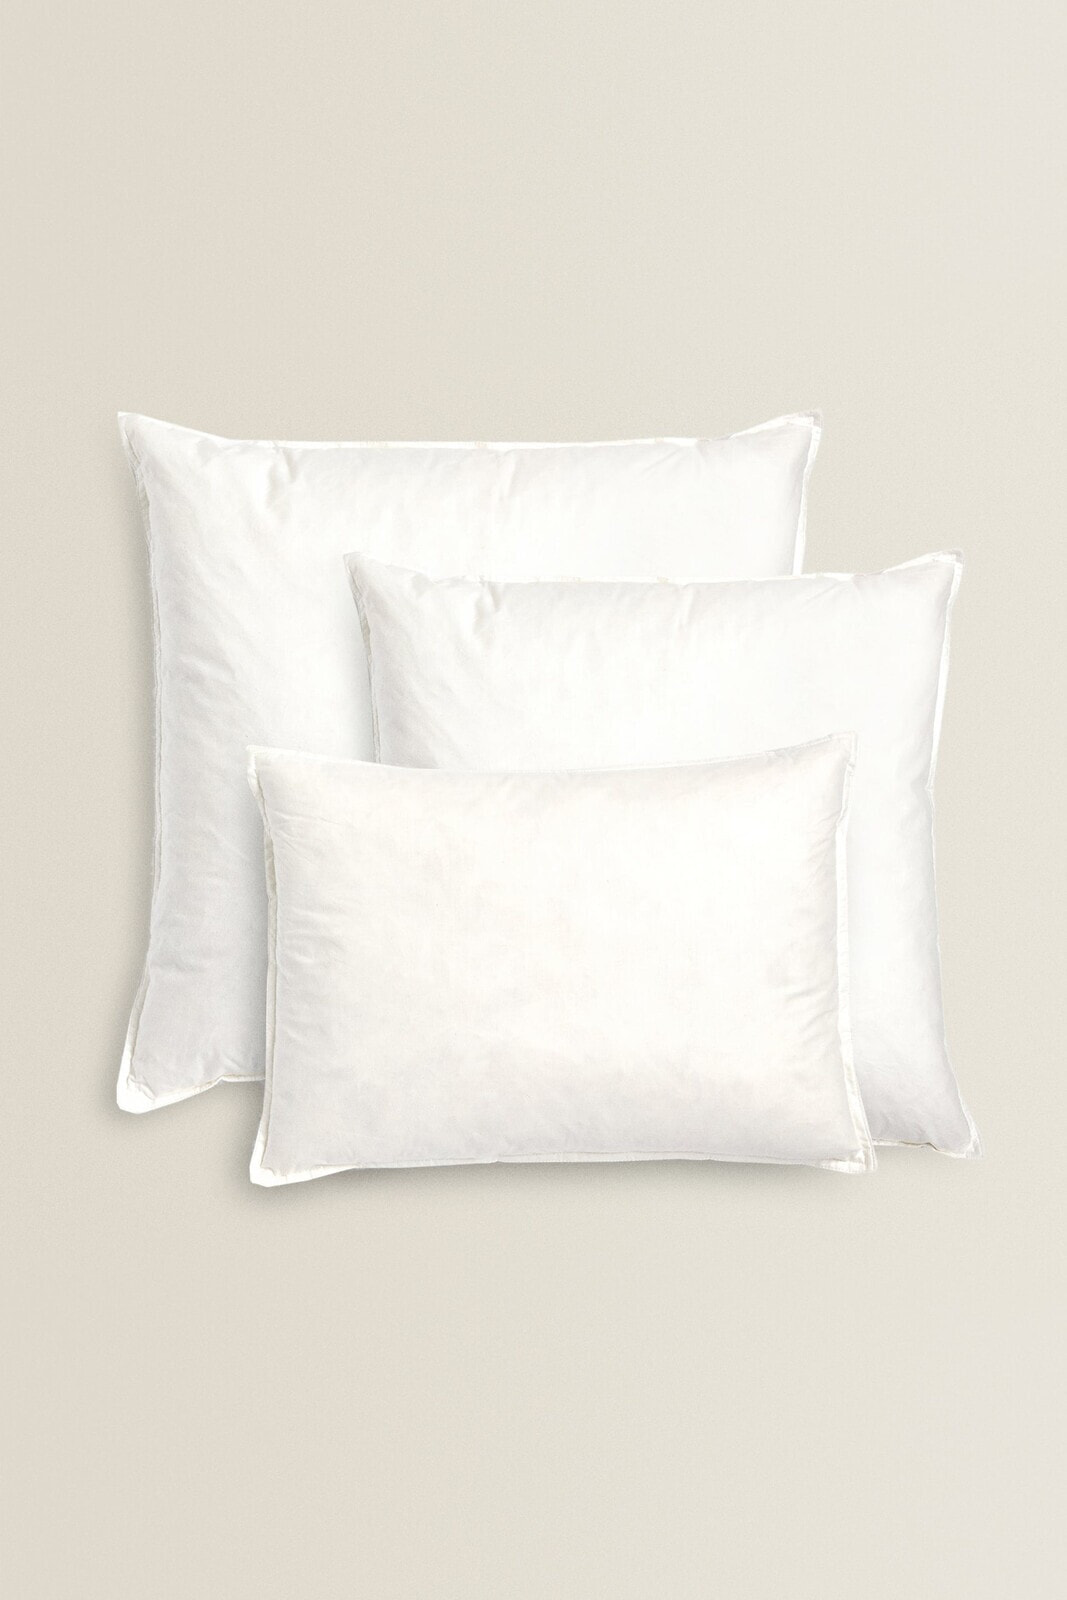 Feather cushion filling / cotton case